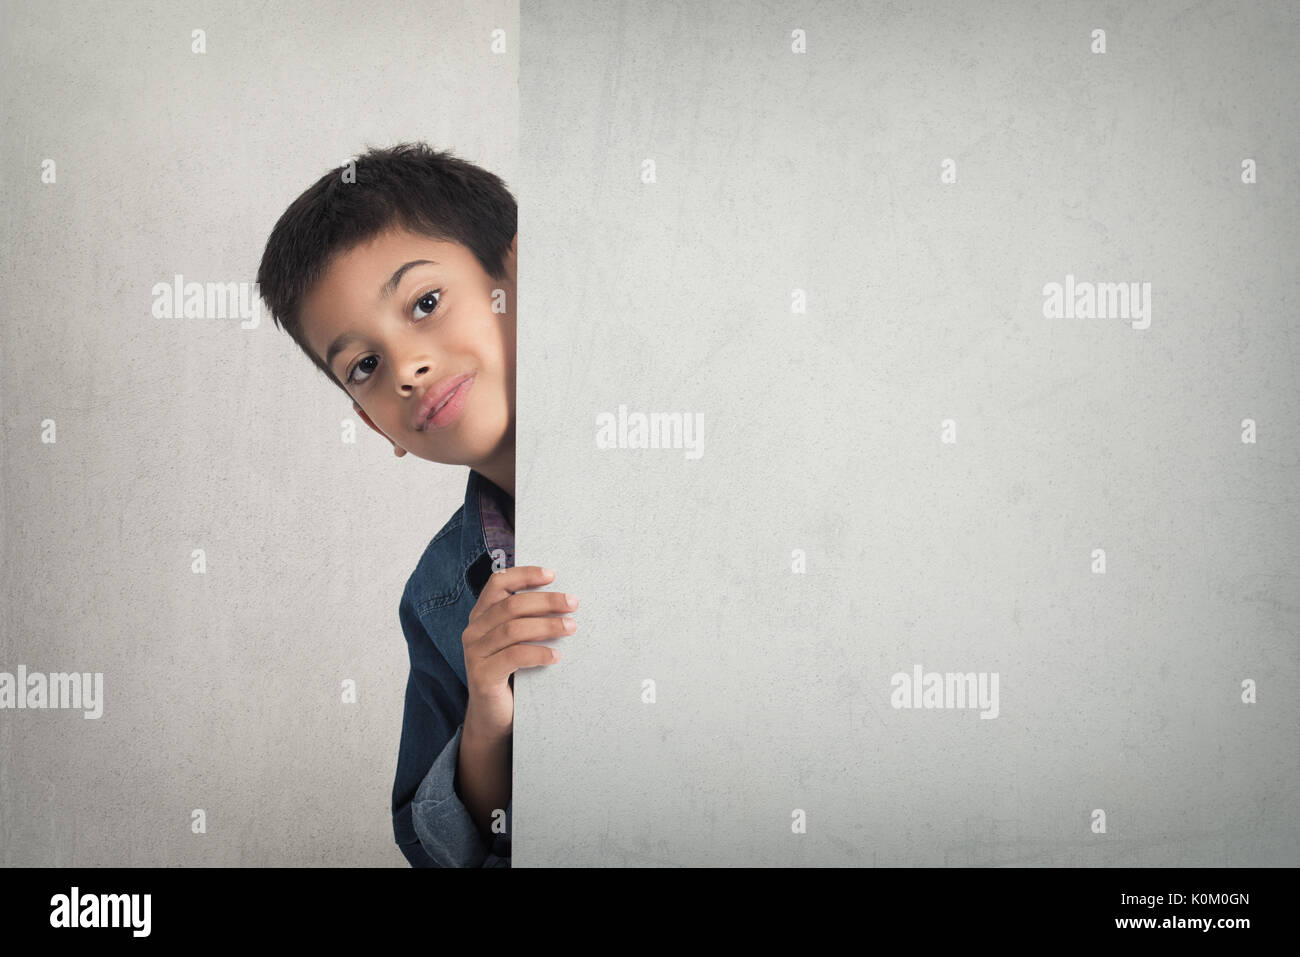 Cute boy looking from behind blank advertising board Stock Photo